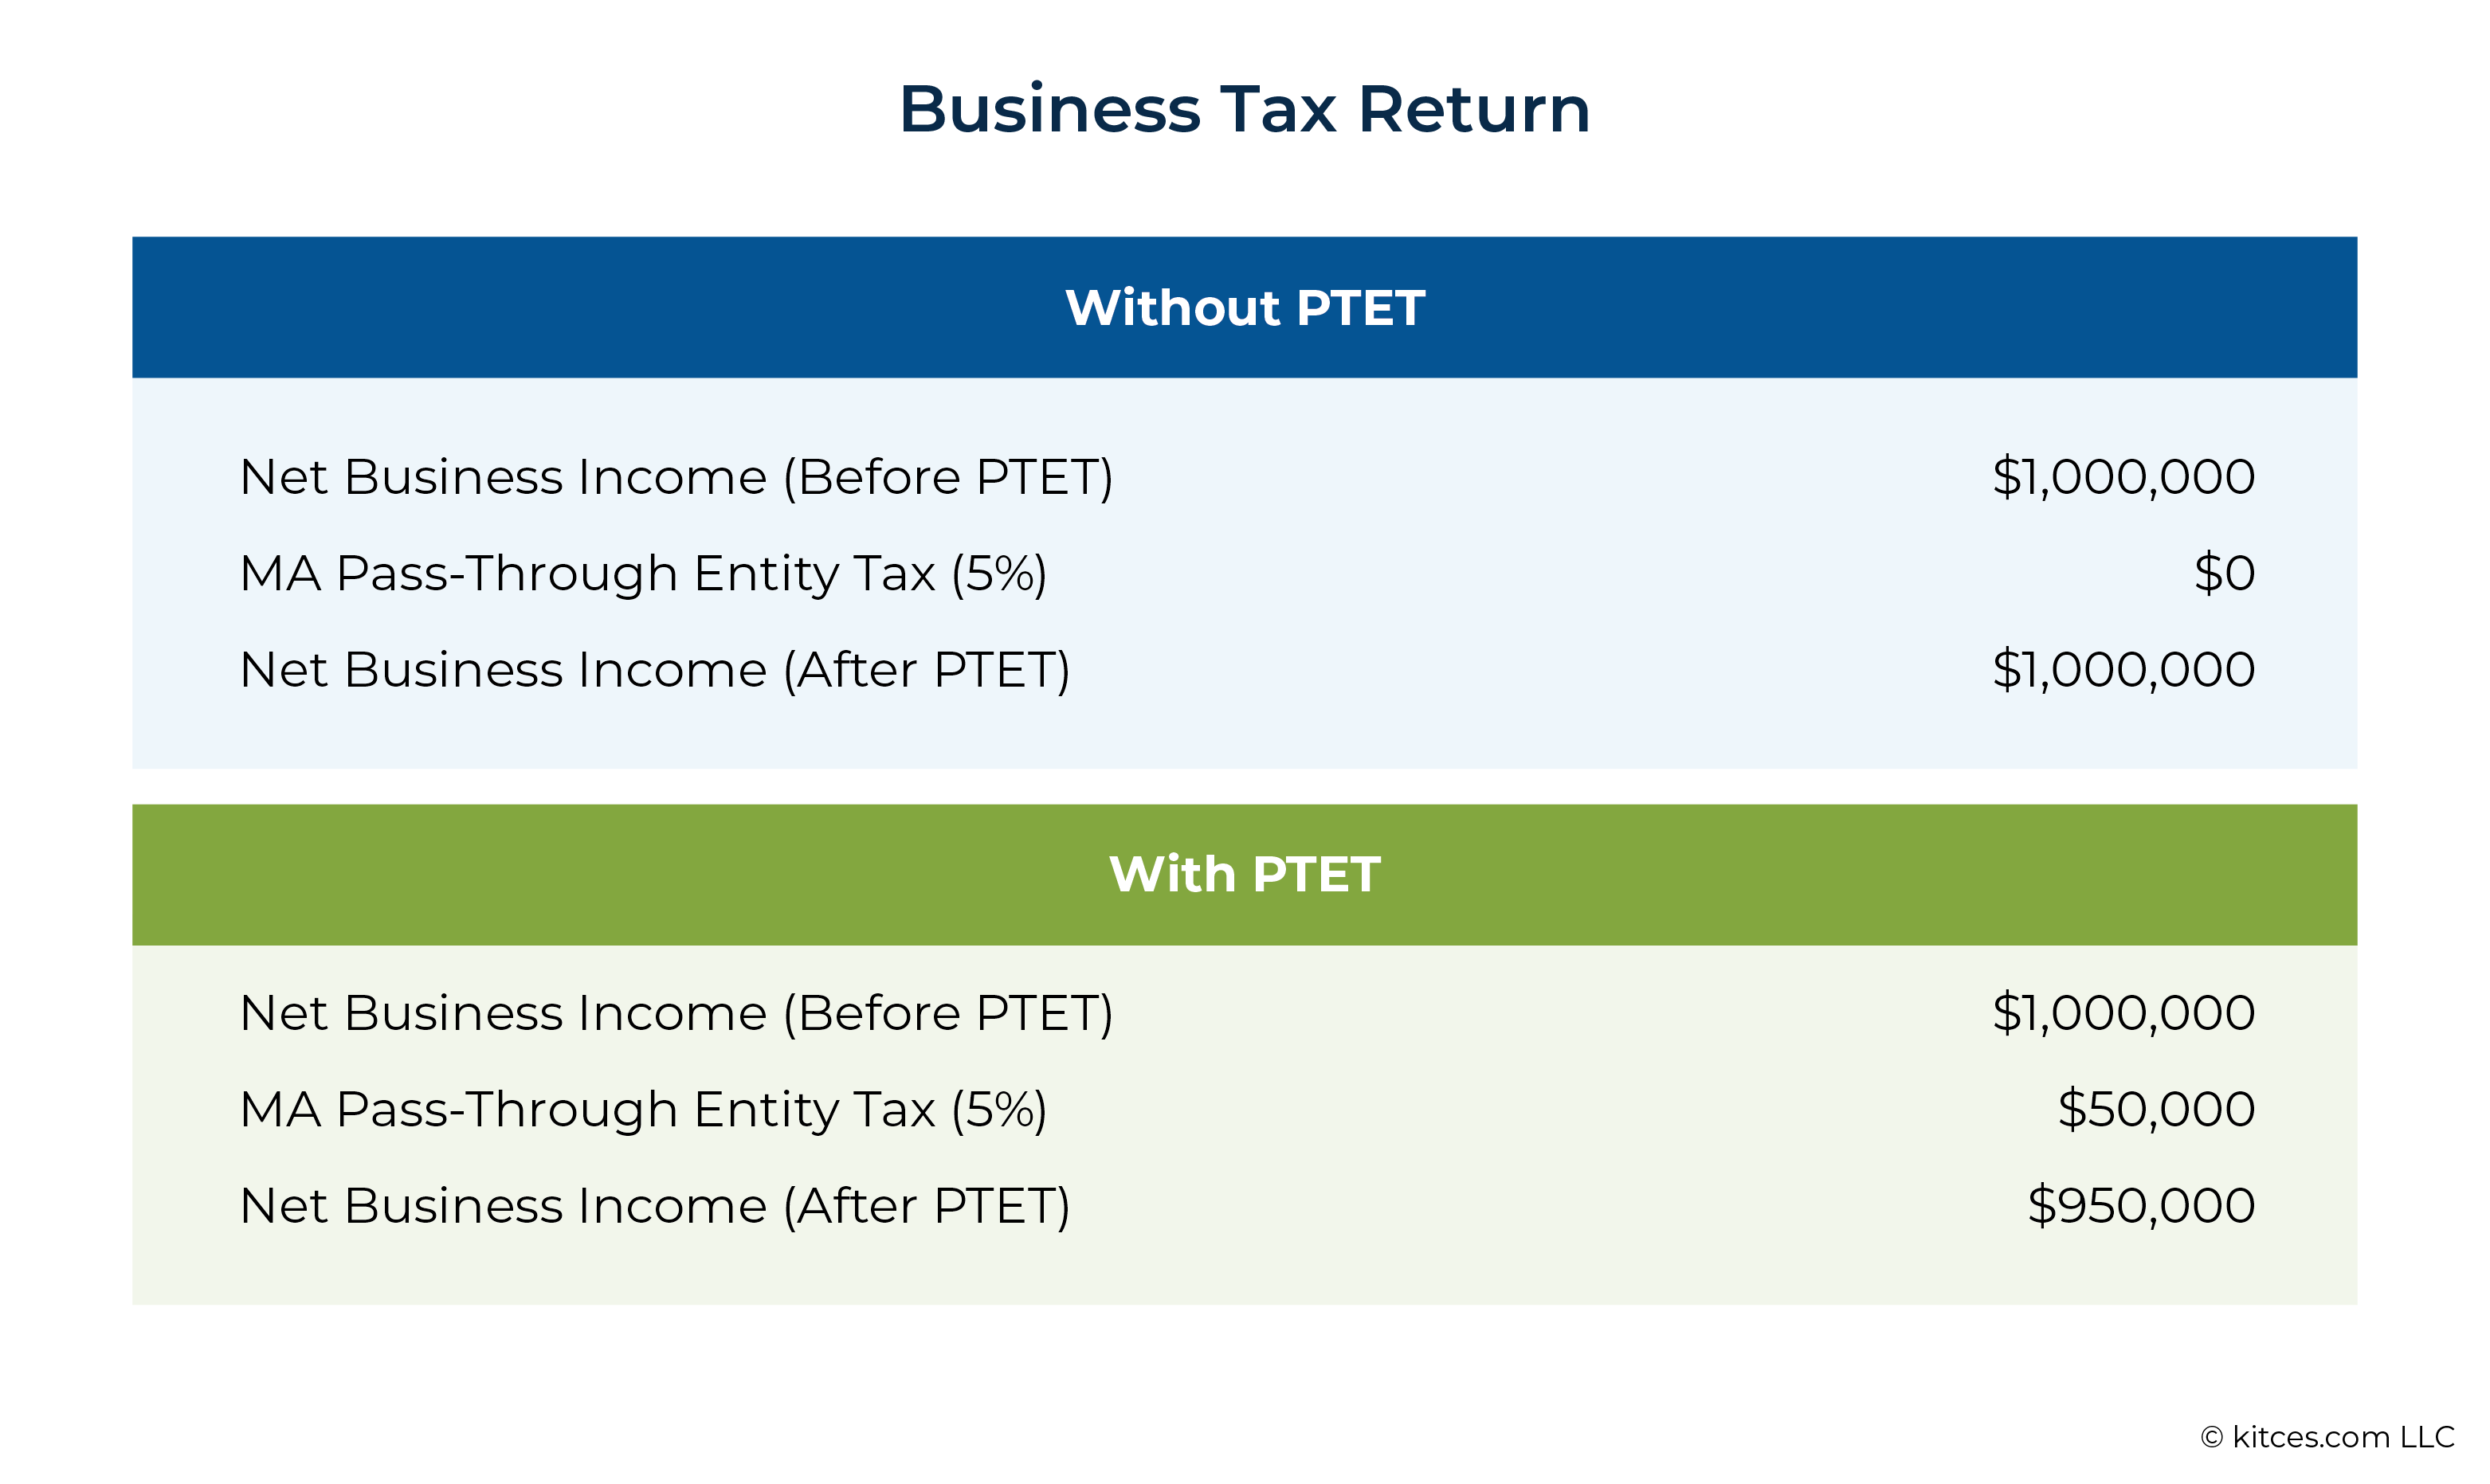 A Business Tax Return With Without PTET